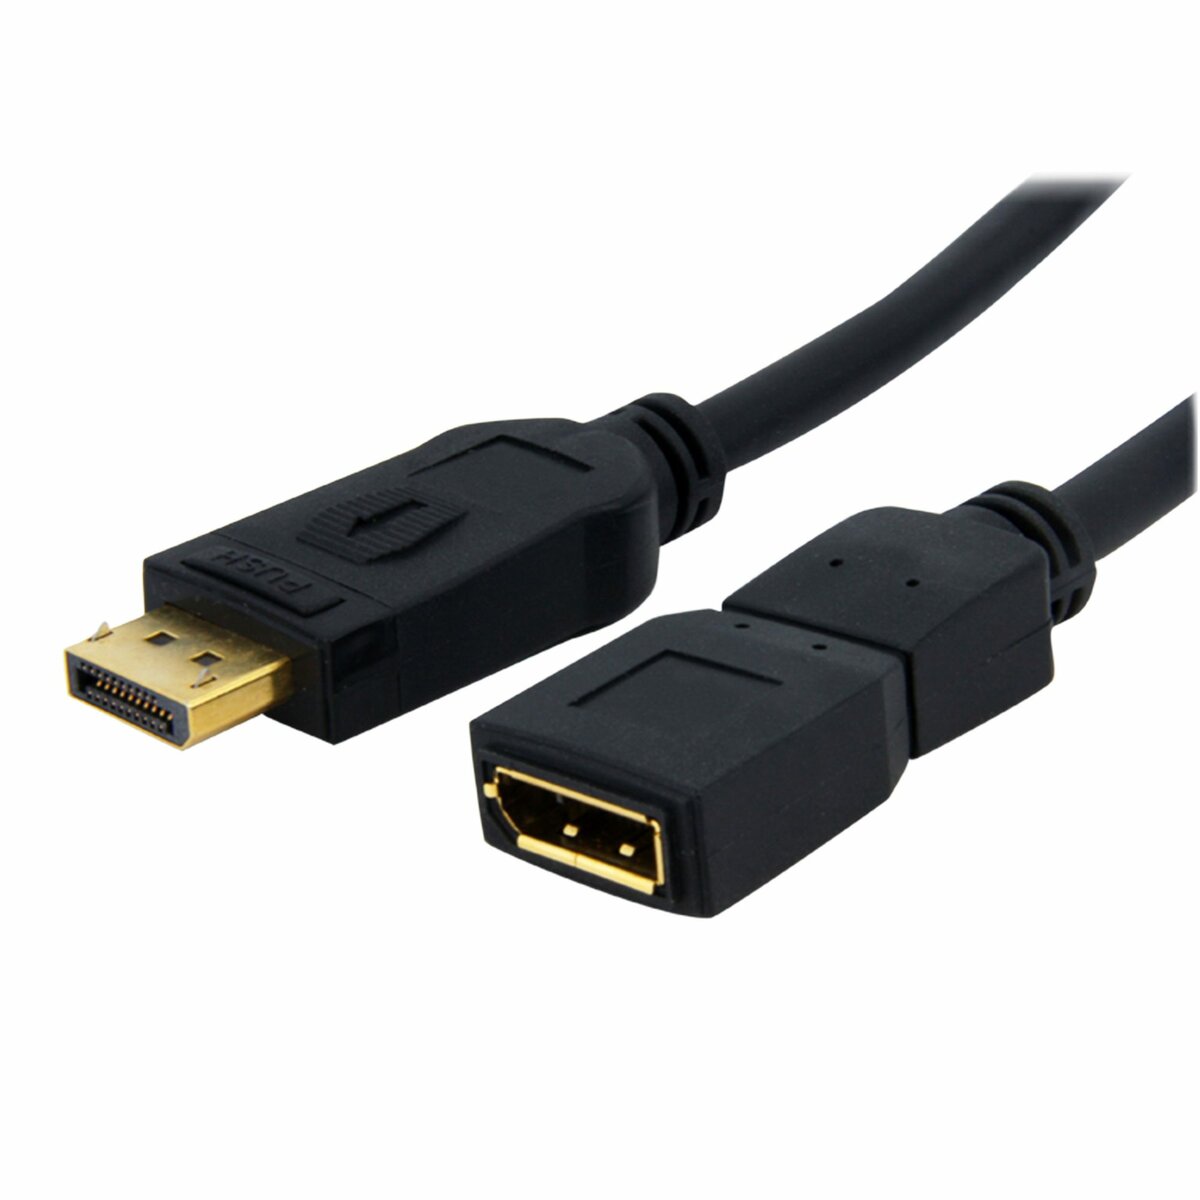 StarTech.com 6ft (2m) DisplayPort 1.2 Cable - 4K x 2K Ultra HD VESA  Certified DisplayPort Cable - DP to DP Cable for Monitor - DP Video/Display  Cord 